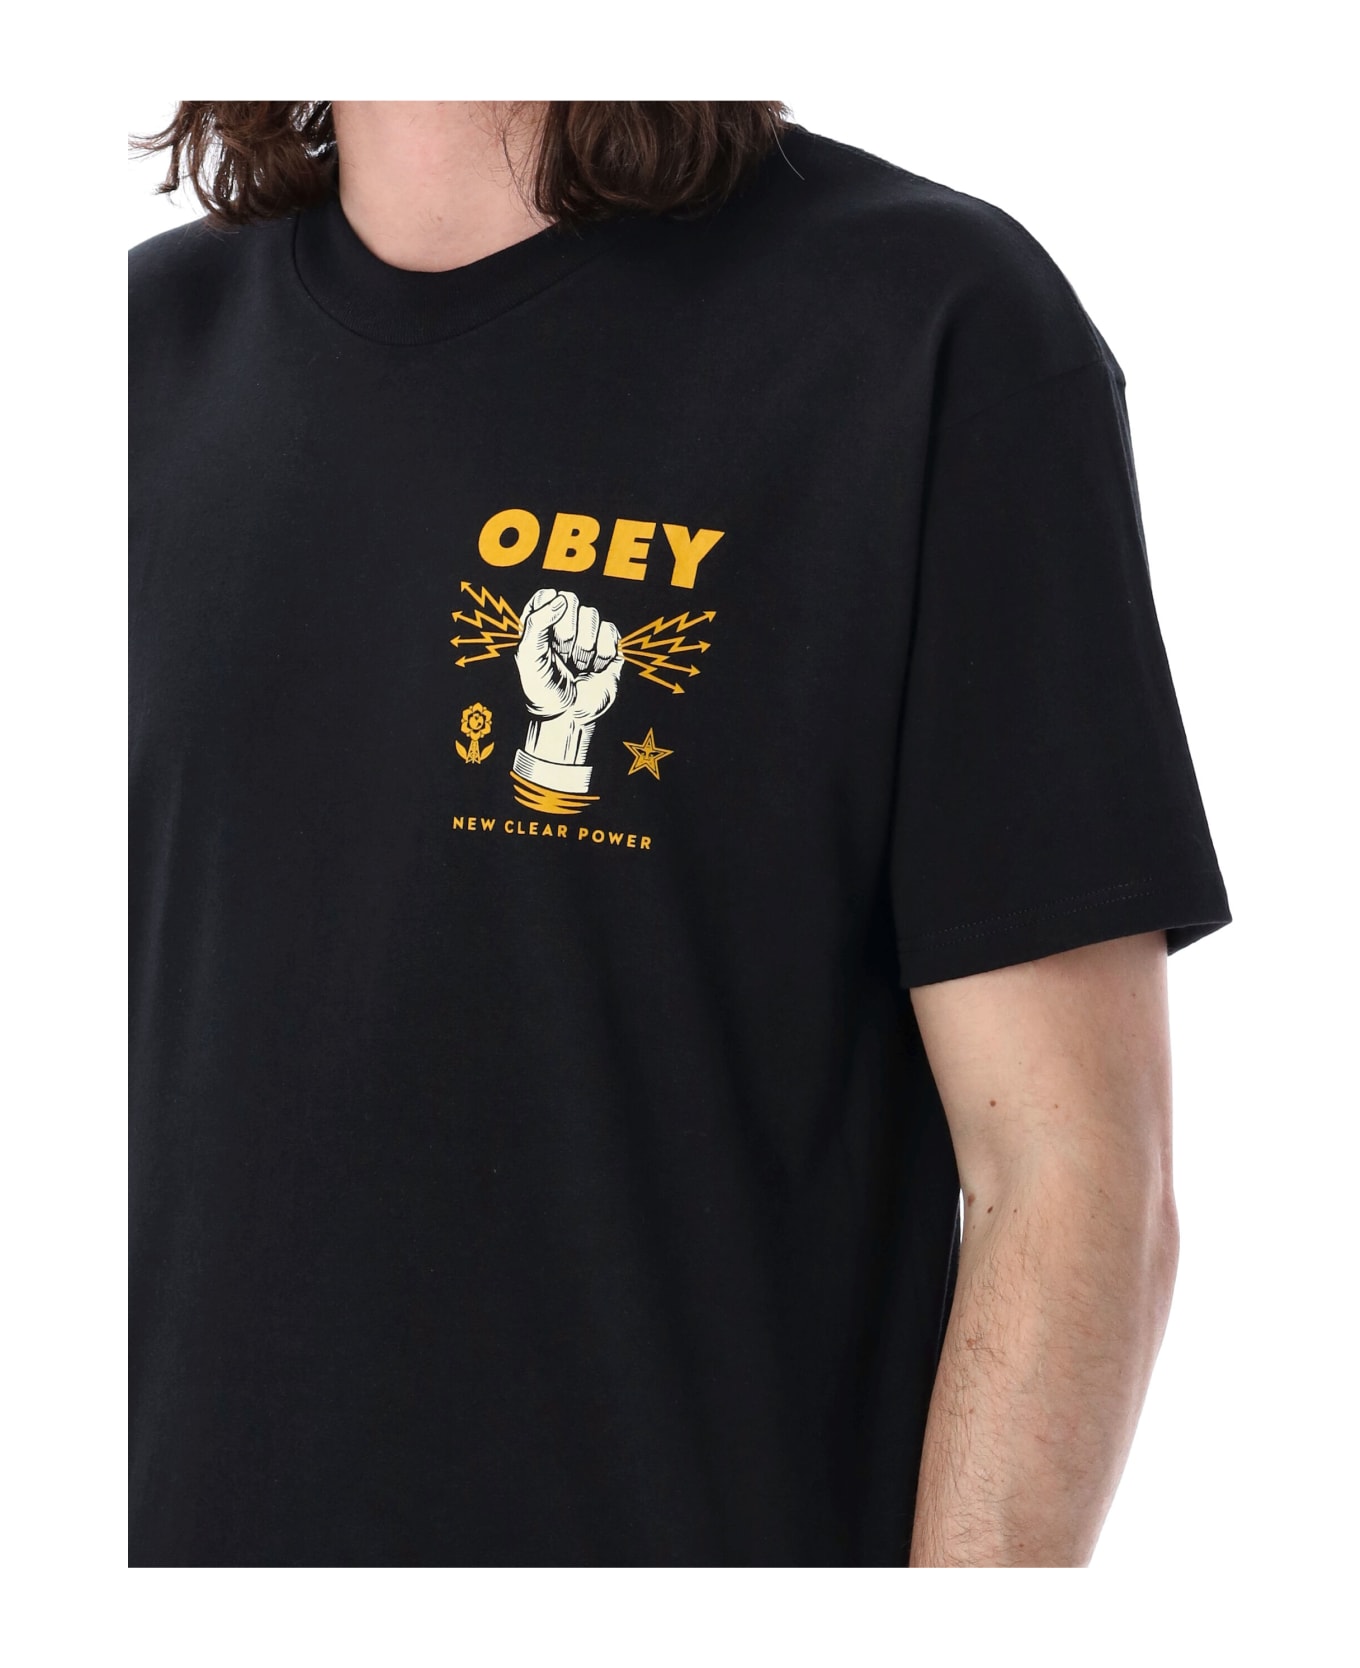 Obey New Clear Power T-shirt - BLACK